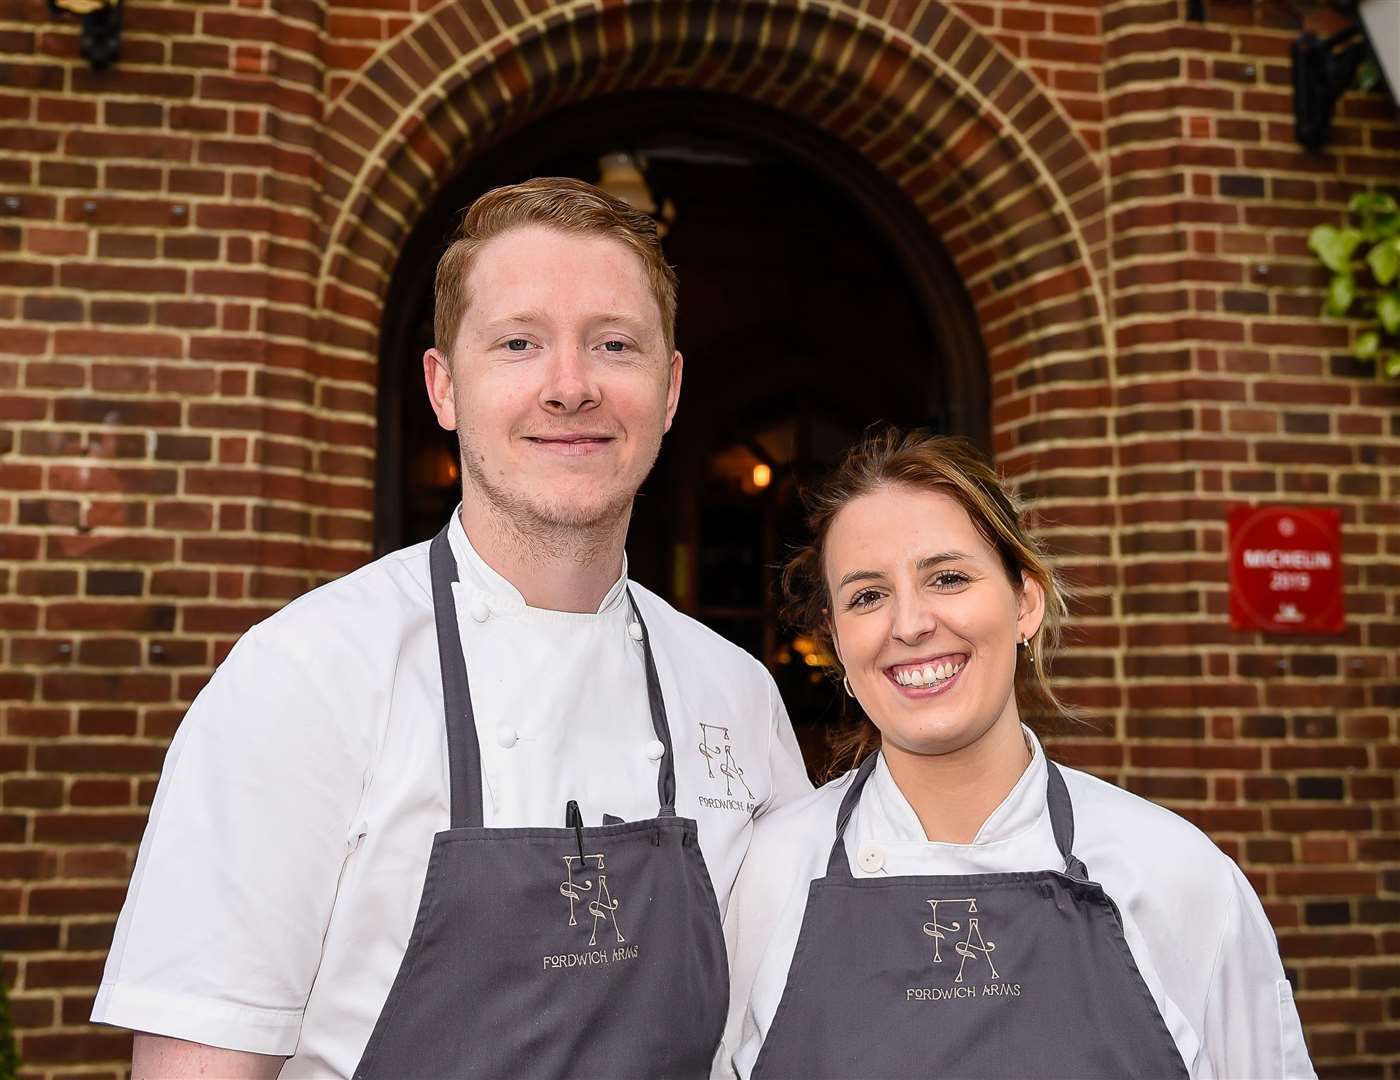 Daniel and Natasha Smith run The Bridge Arms in Bridge near Canterbury, which has just scooped a Michelin star. Picture: Alan Langley